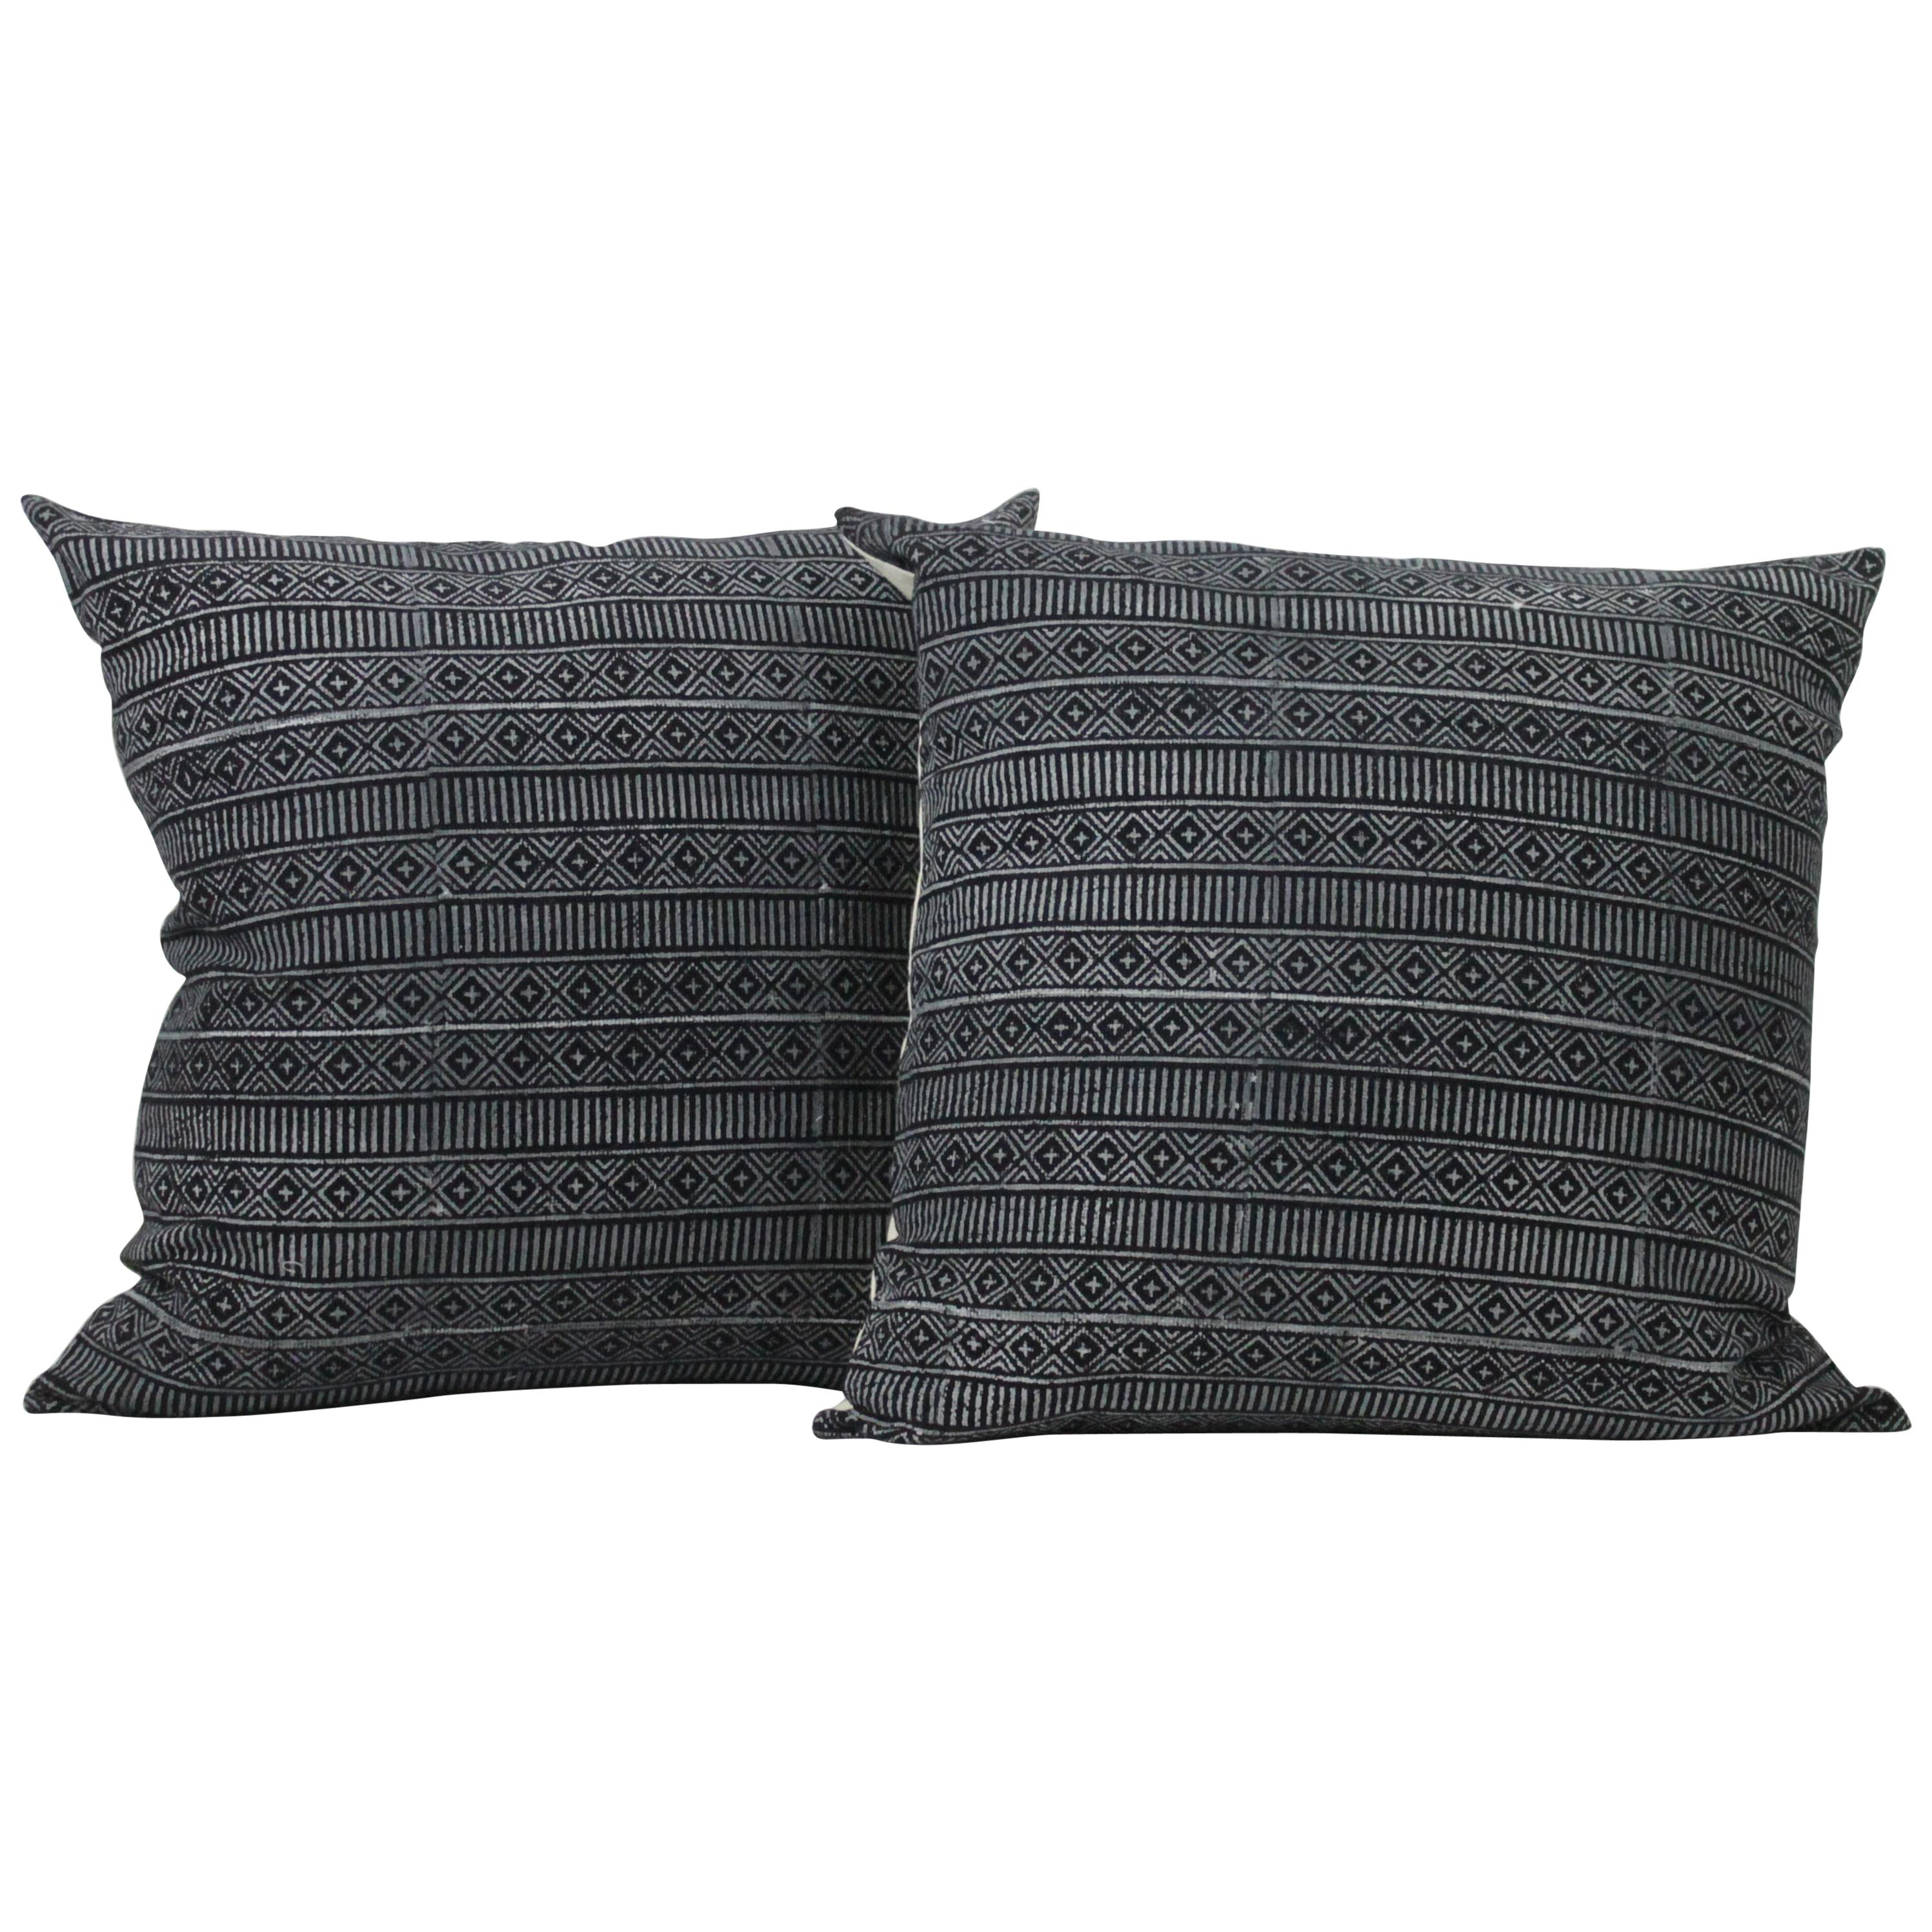 Black and Off-White Geometric Style Pillows For Sale